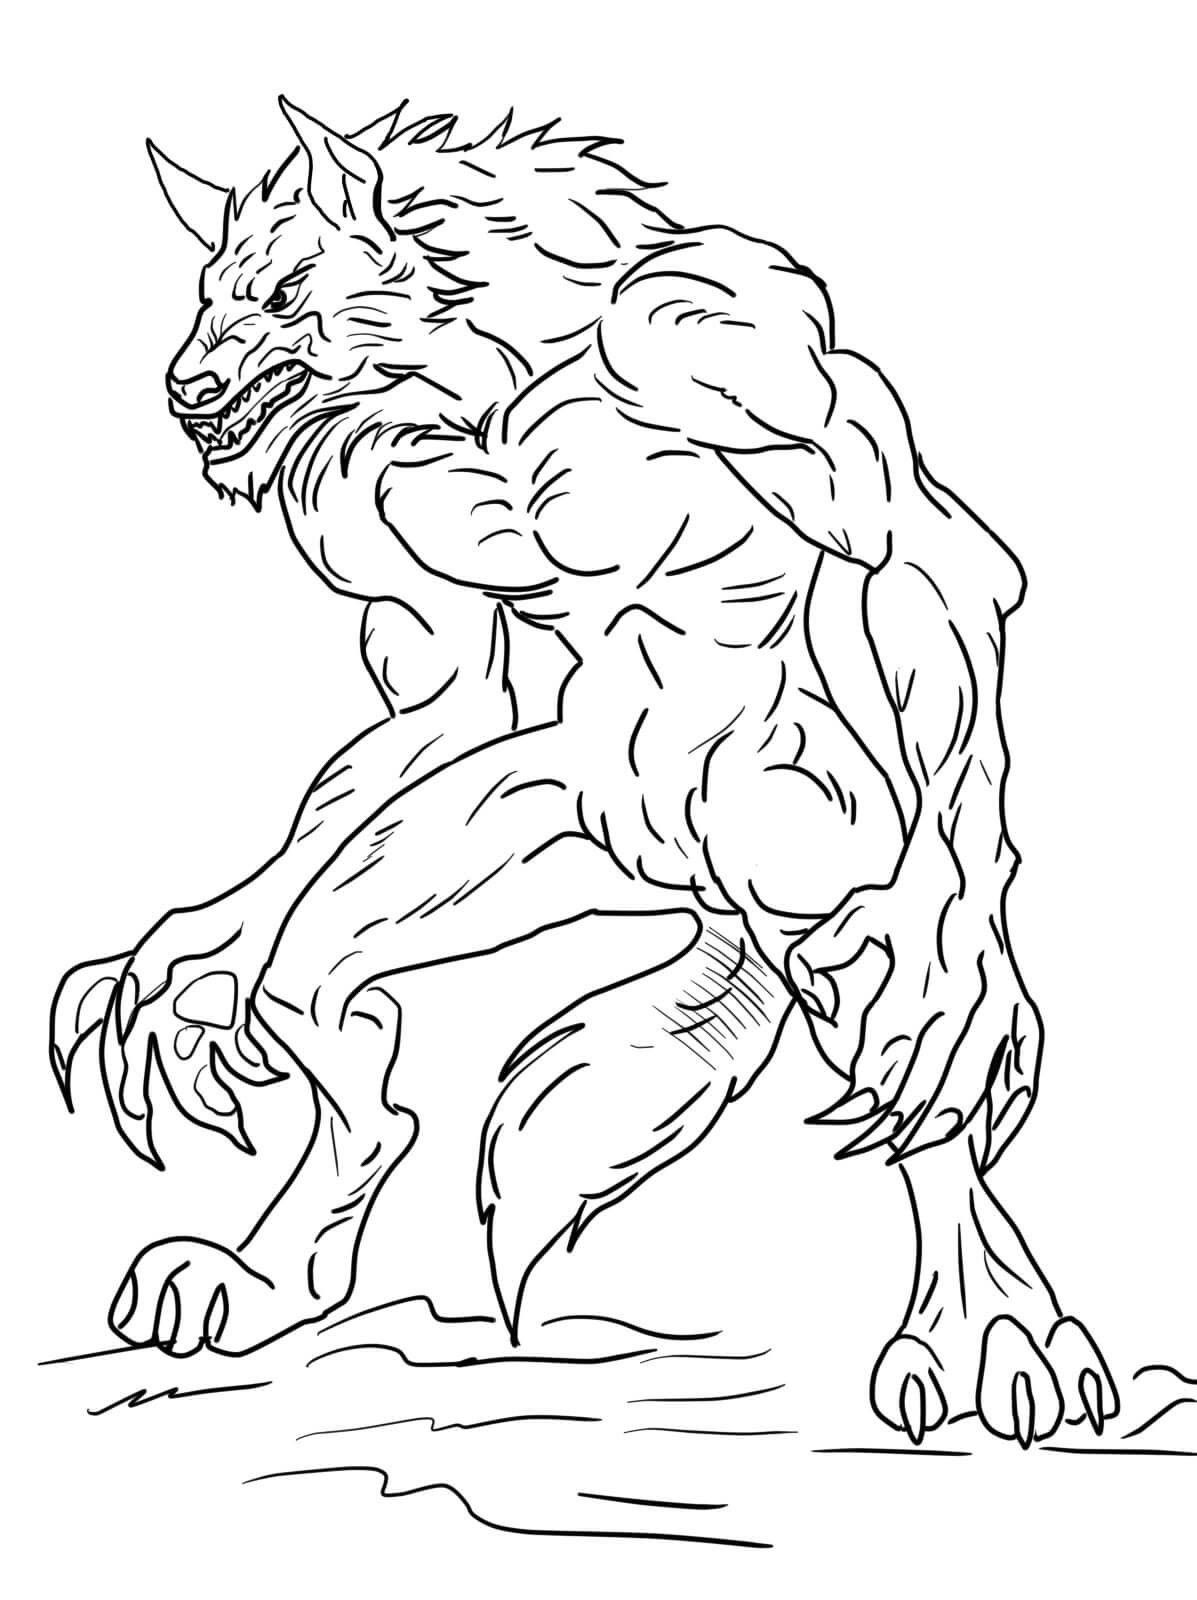 werewolf-coloring-pages-for-kids-2